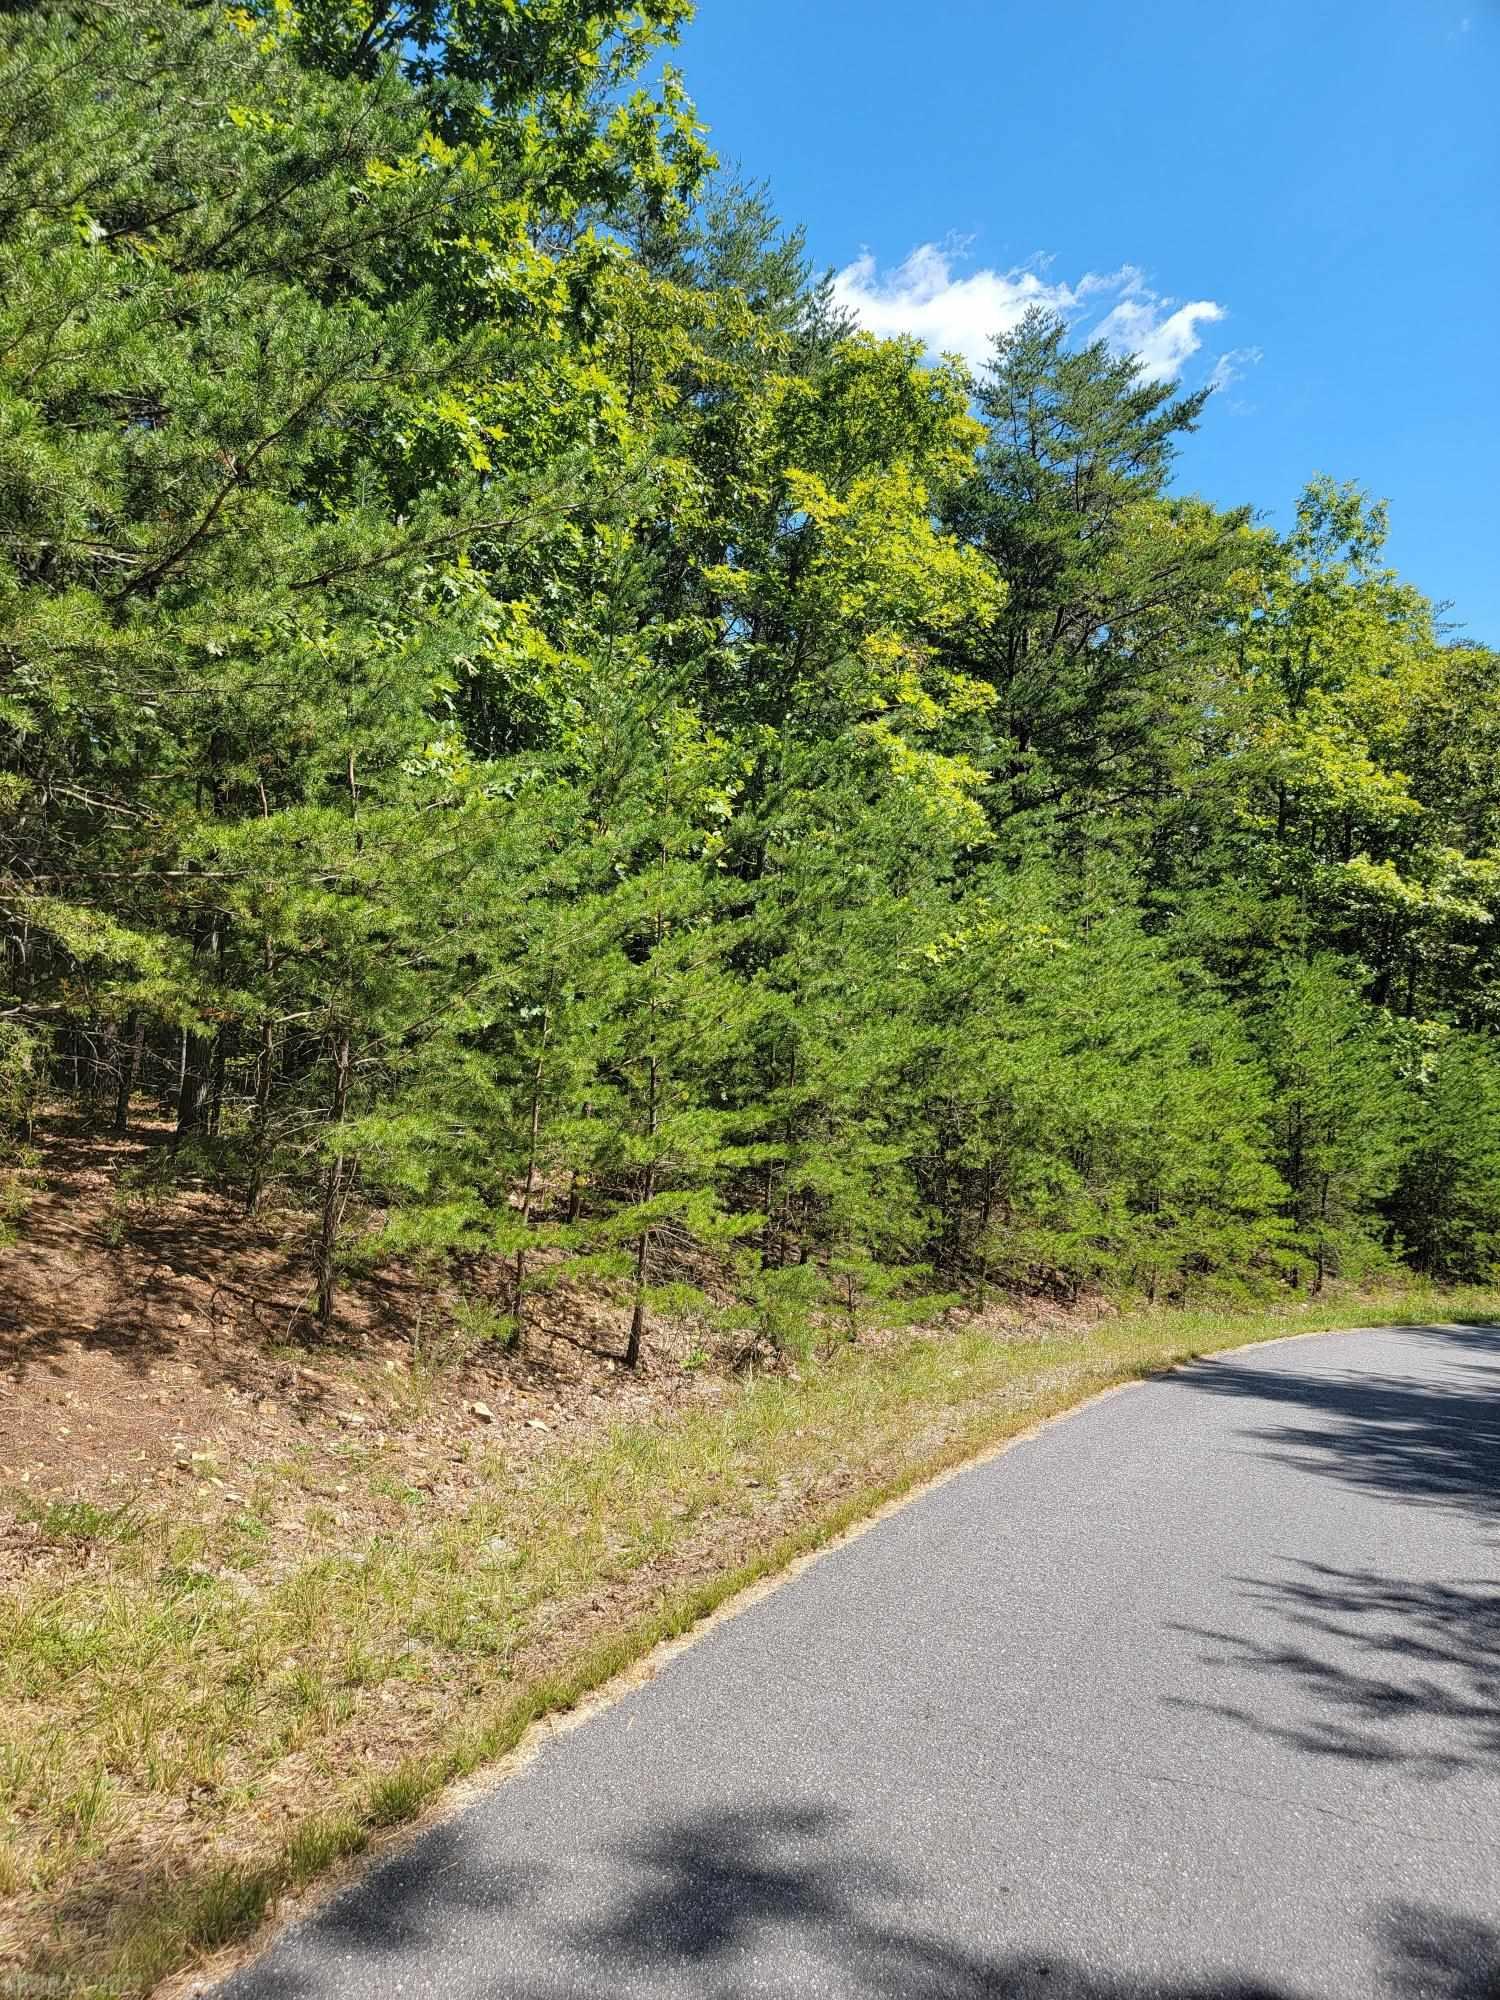 Worthy of your dream home, offering a peaceful retreat! This 4.3 acre lot is in an ideal location for a commute to Blacksburg or Roanoke.